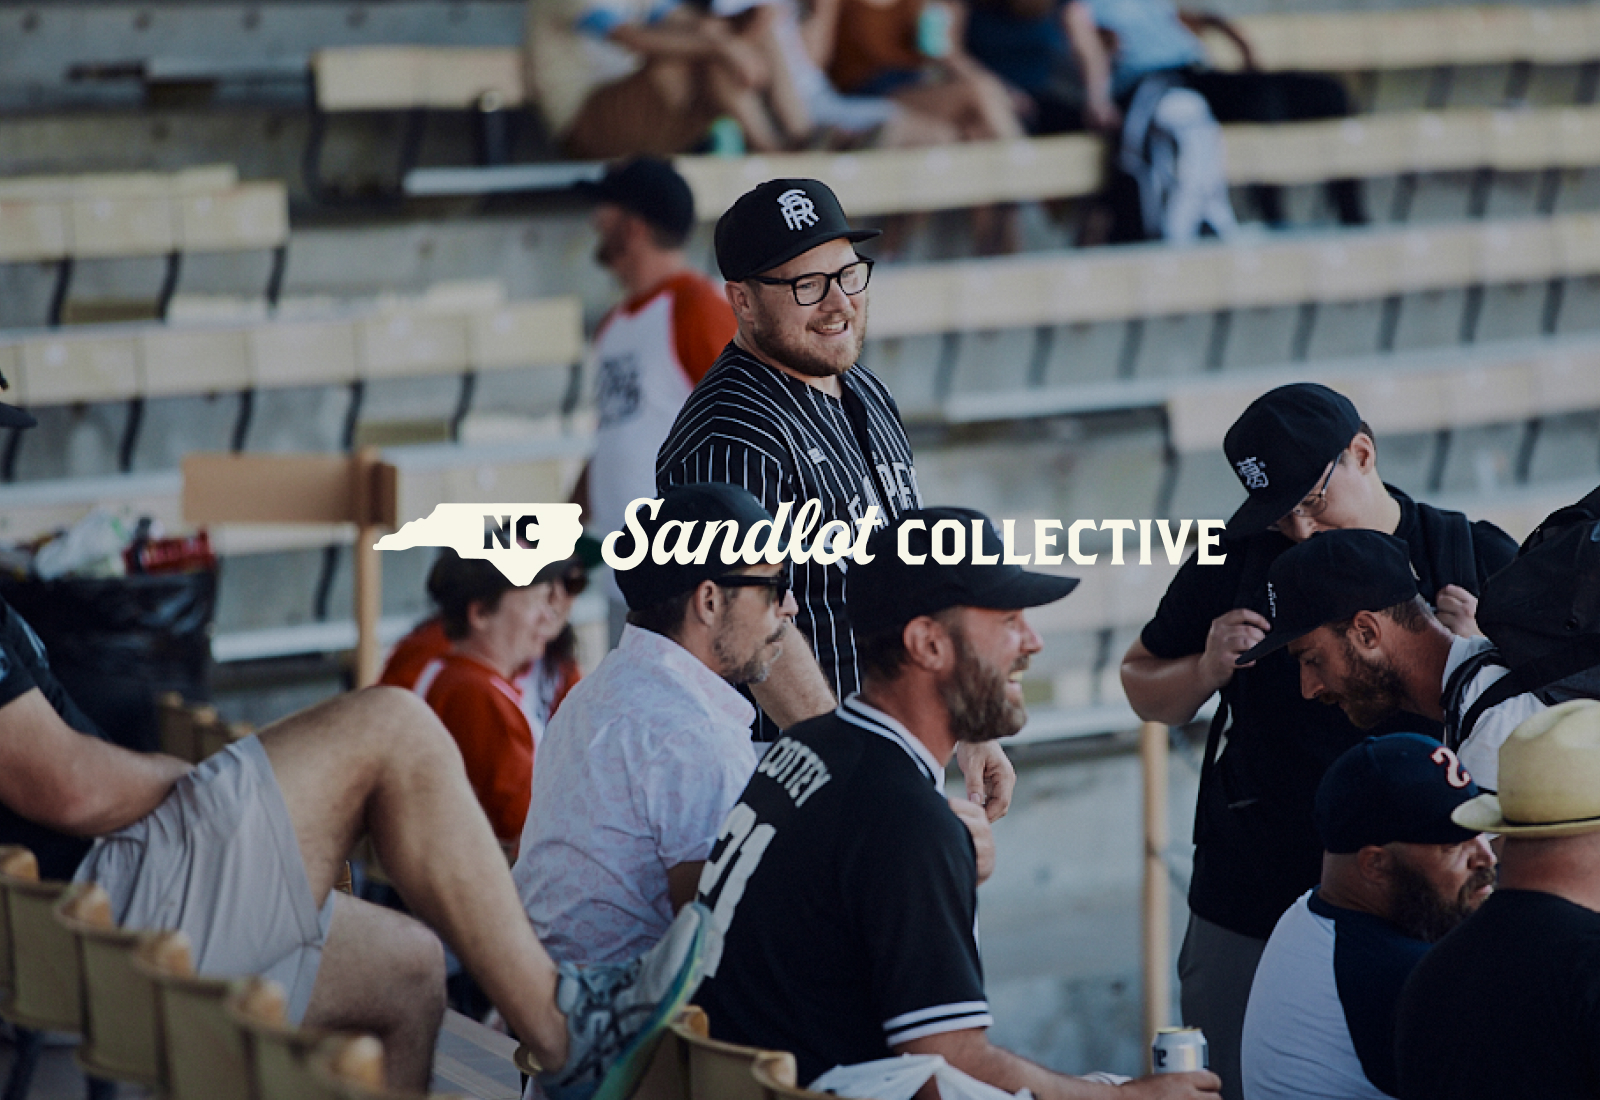 Logo overtop photo of players and fans in the stands | Carolina Sandlot Collective